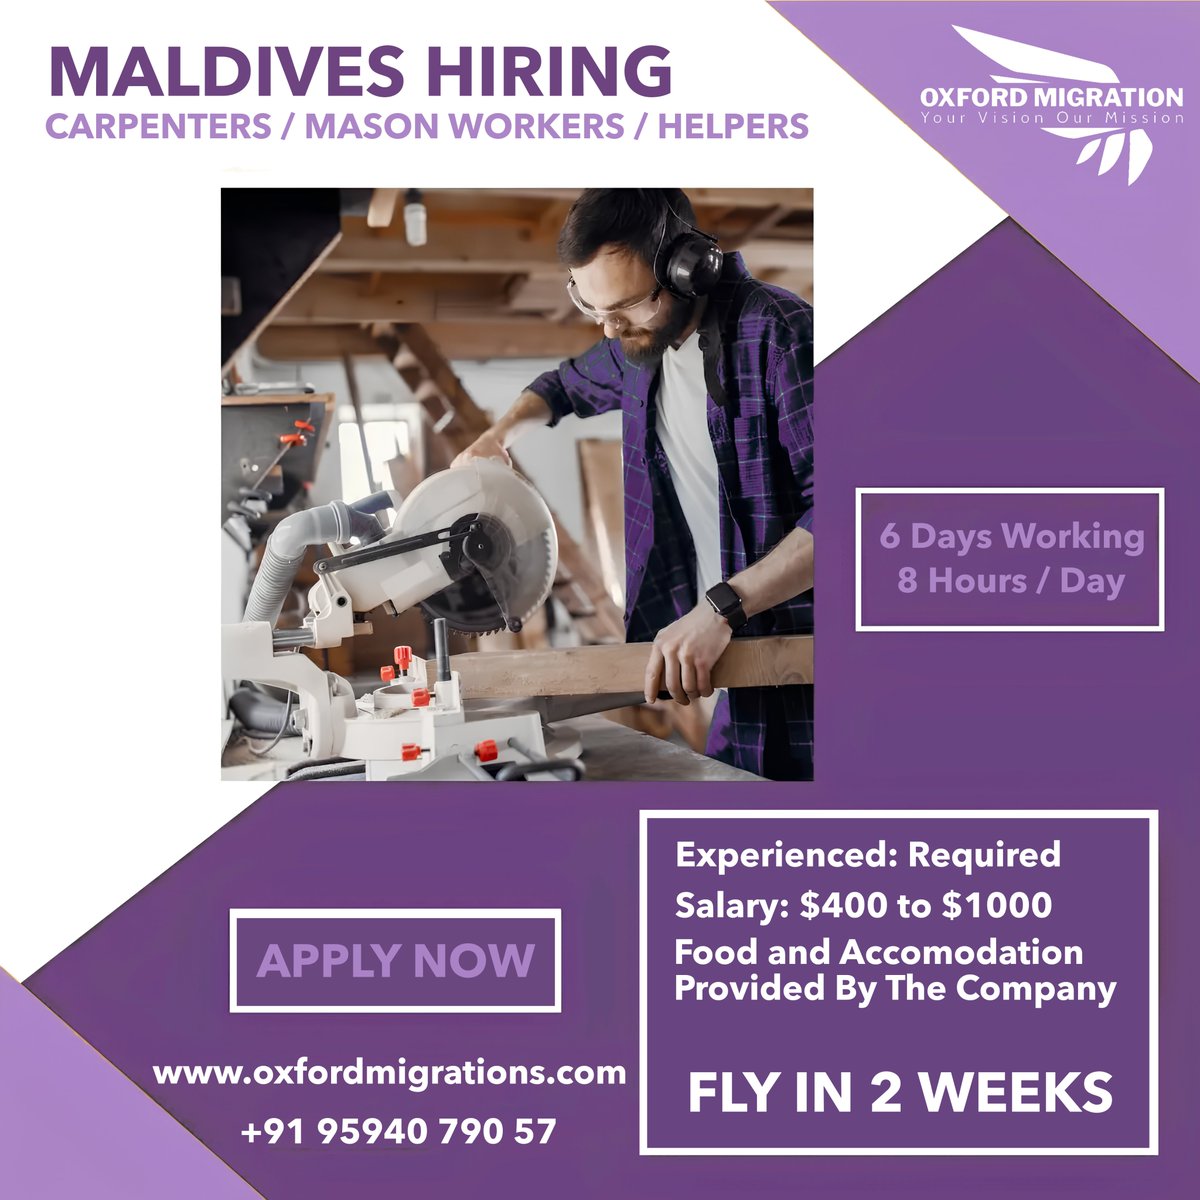 MALDIVES HIRING !!!
Carpenter | Mason Workers | Helpers.
Salary : 400 $ To 1000 $.
Food Accommodation by the company.
FLY IN 2 WEEKS.

#maldivesworkvisa #maldivesworkpermit #maldiveswork #maldivesimmigration #maldivesjobs #maldiveshiring #maldives #immigration #workpermit